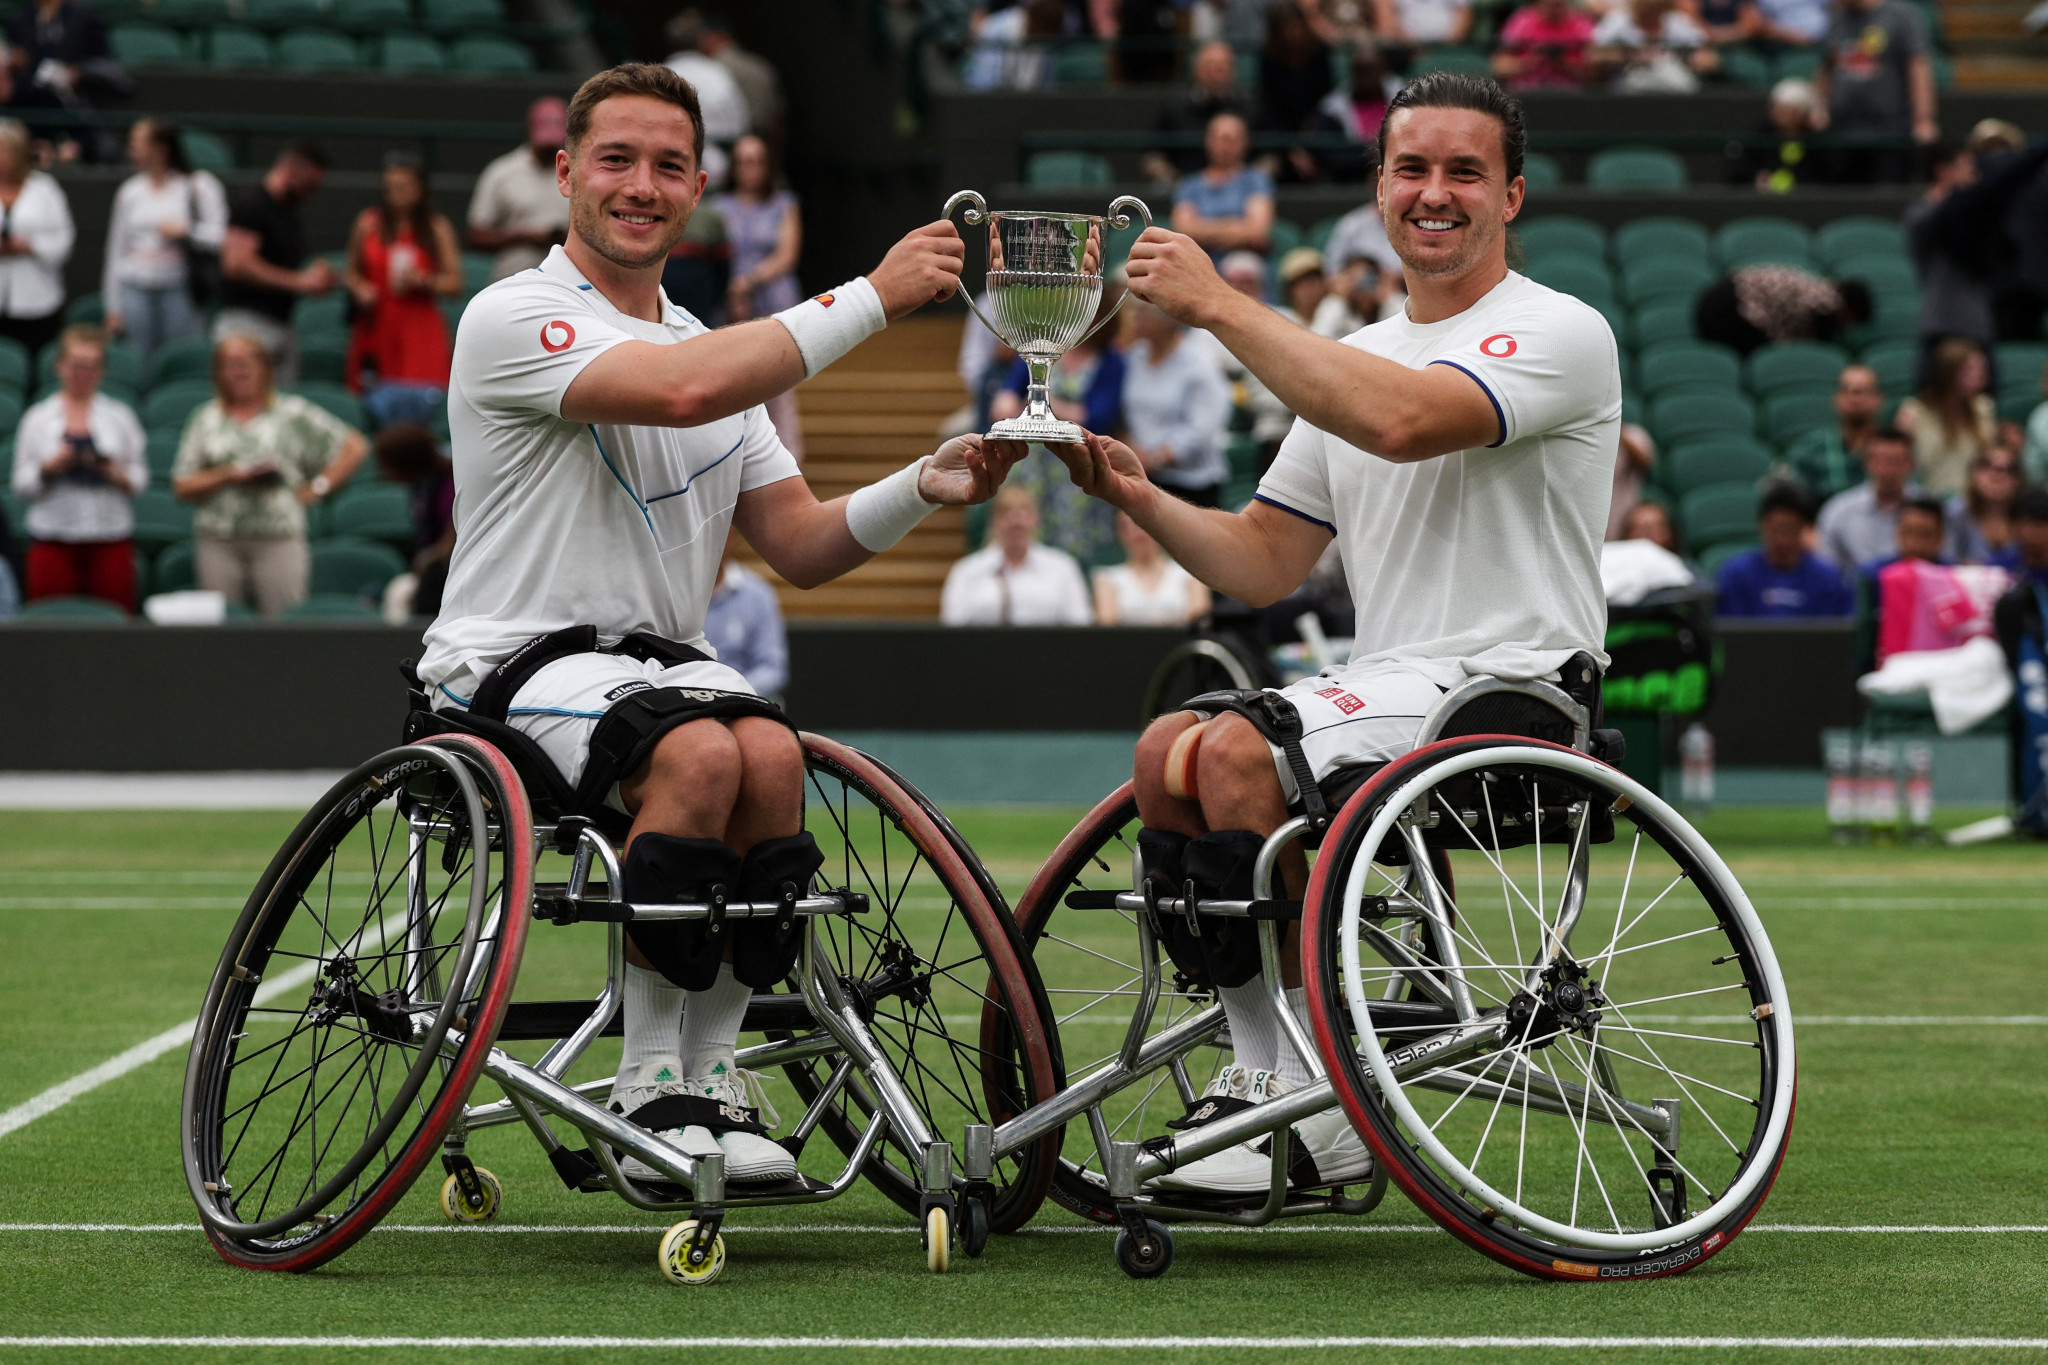 Hewett and Reid deliver home success with wheelchair doubles title at Wimbledon